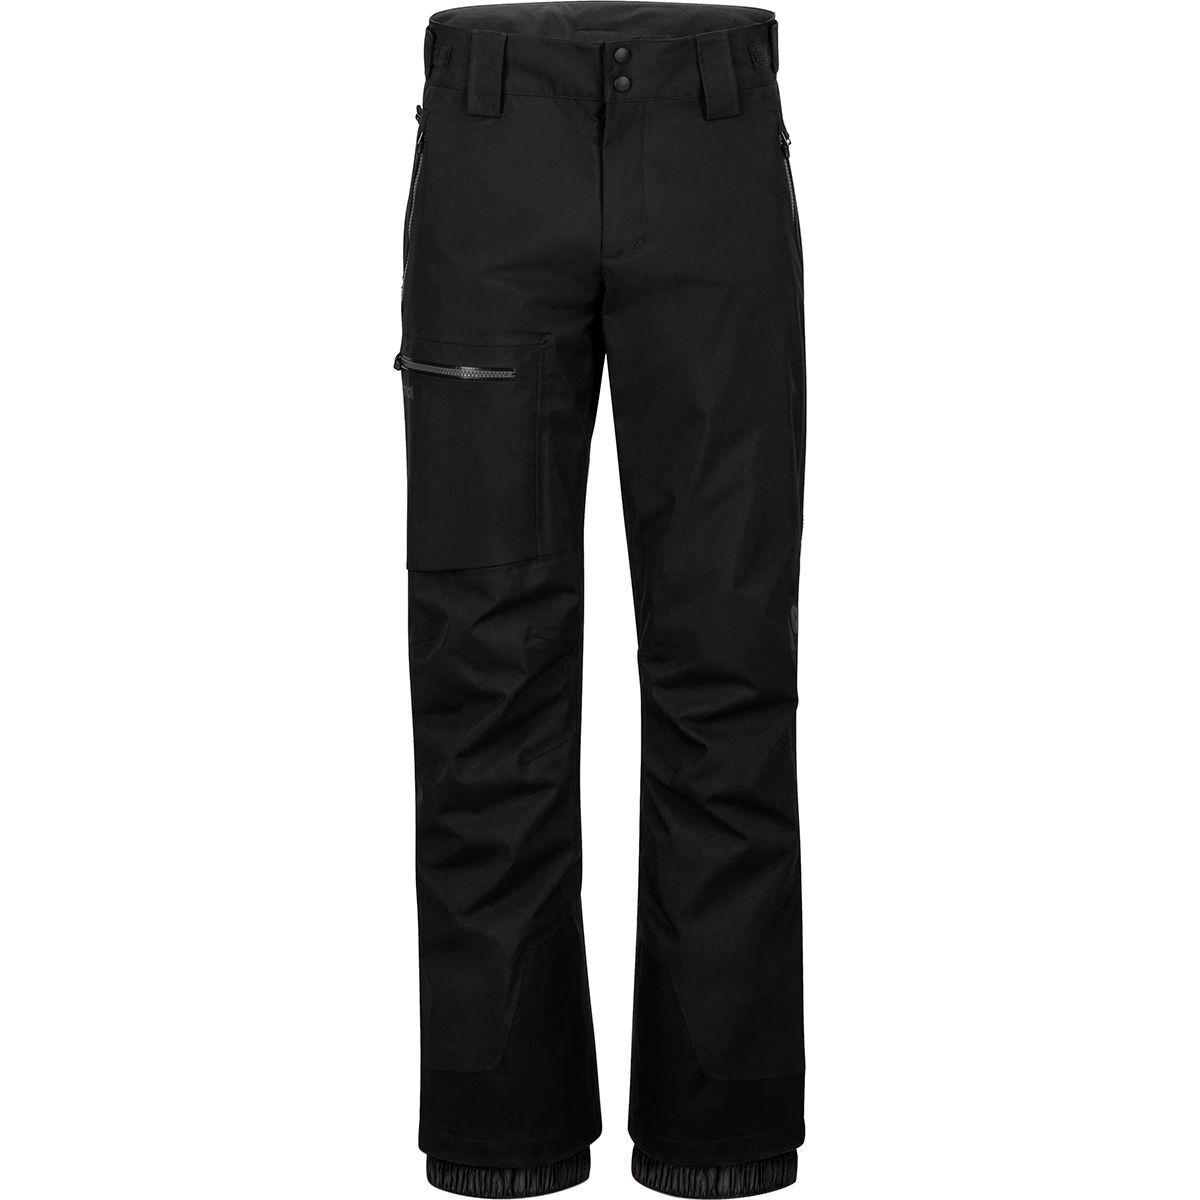 Marmot Men's Refuge Pant now available for 60% off